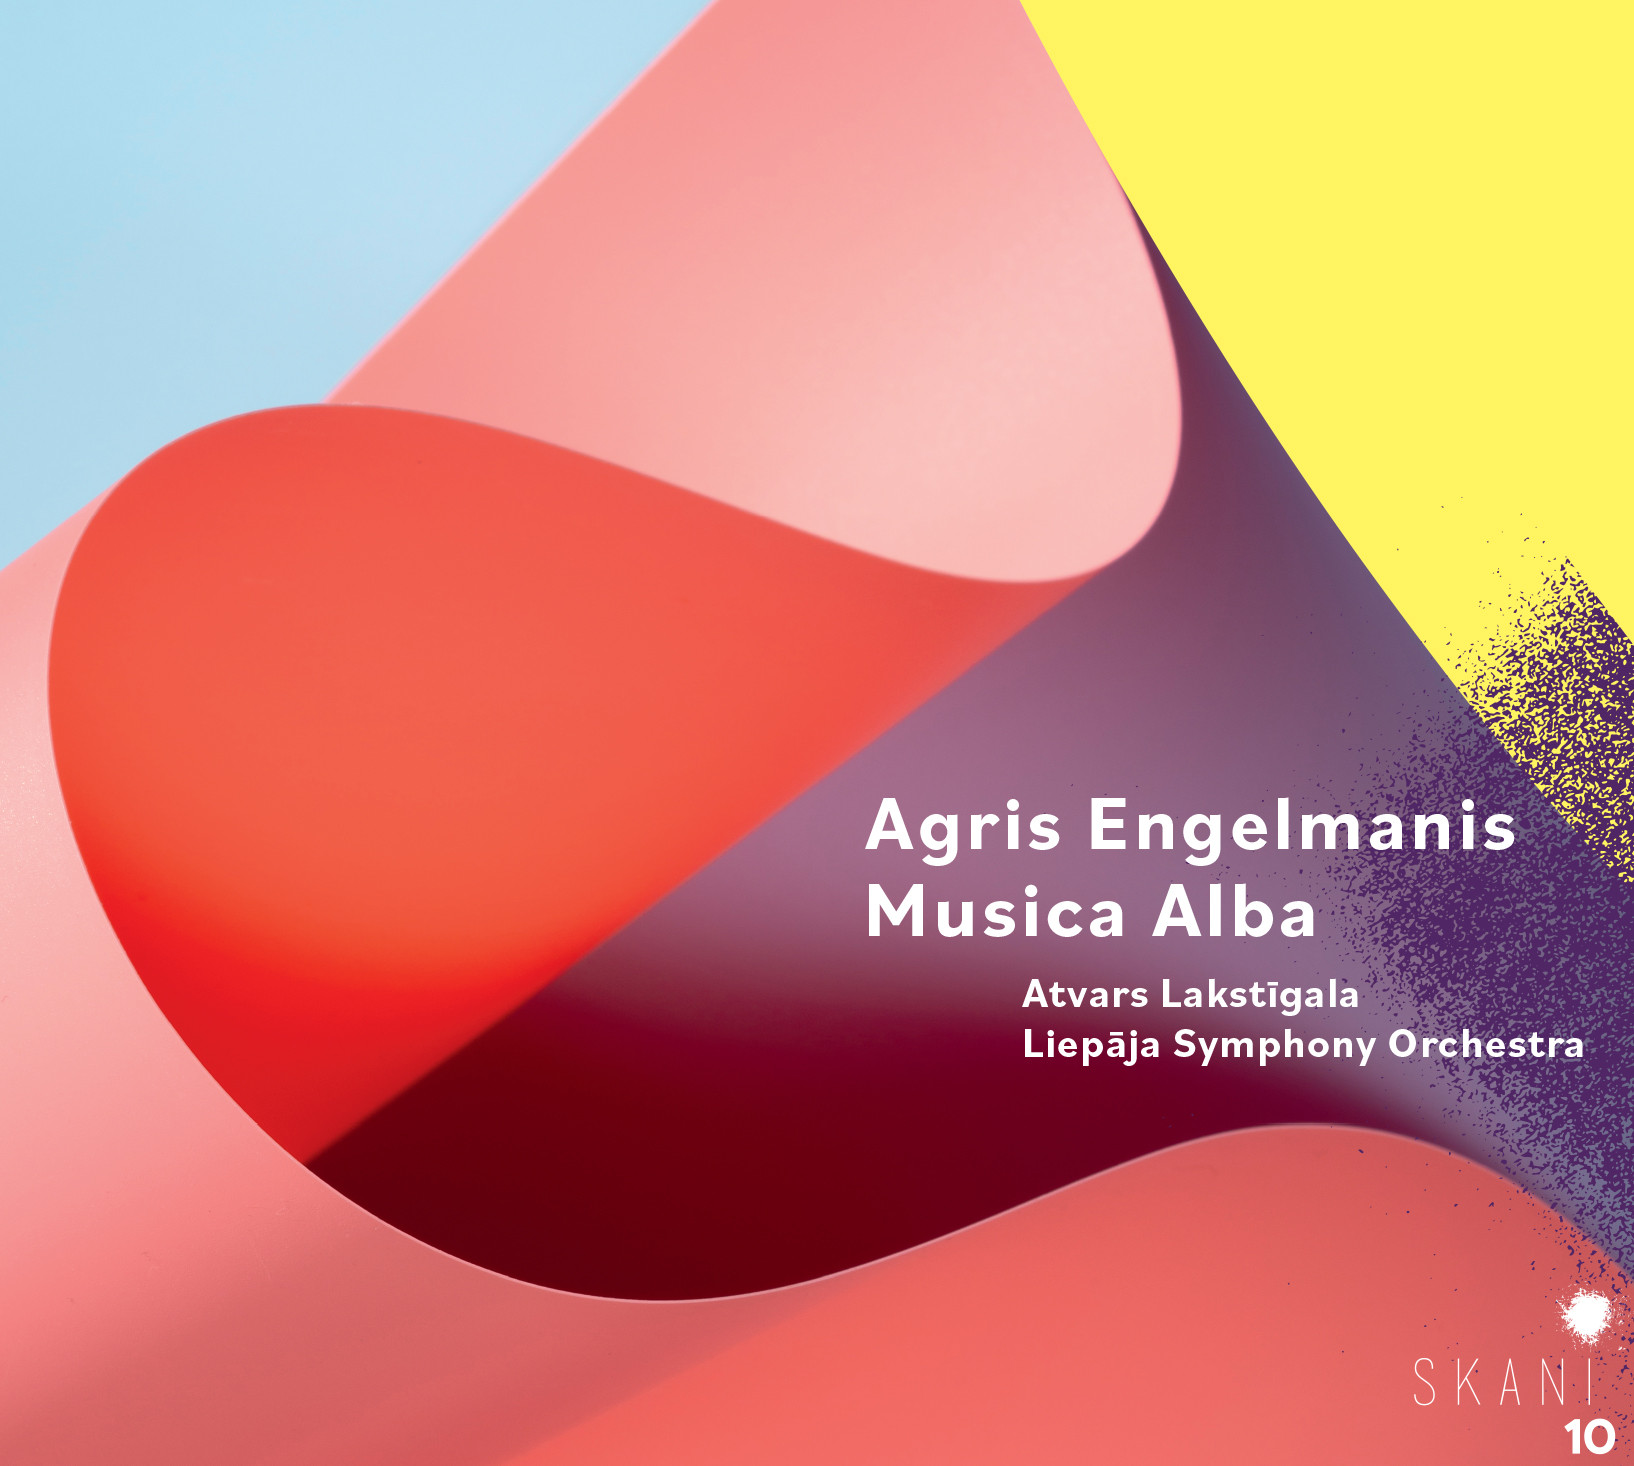 The symphonic music album by Agris Engelmanis is out now